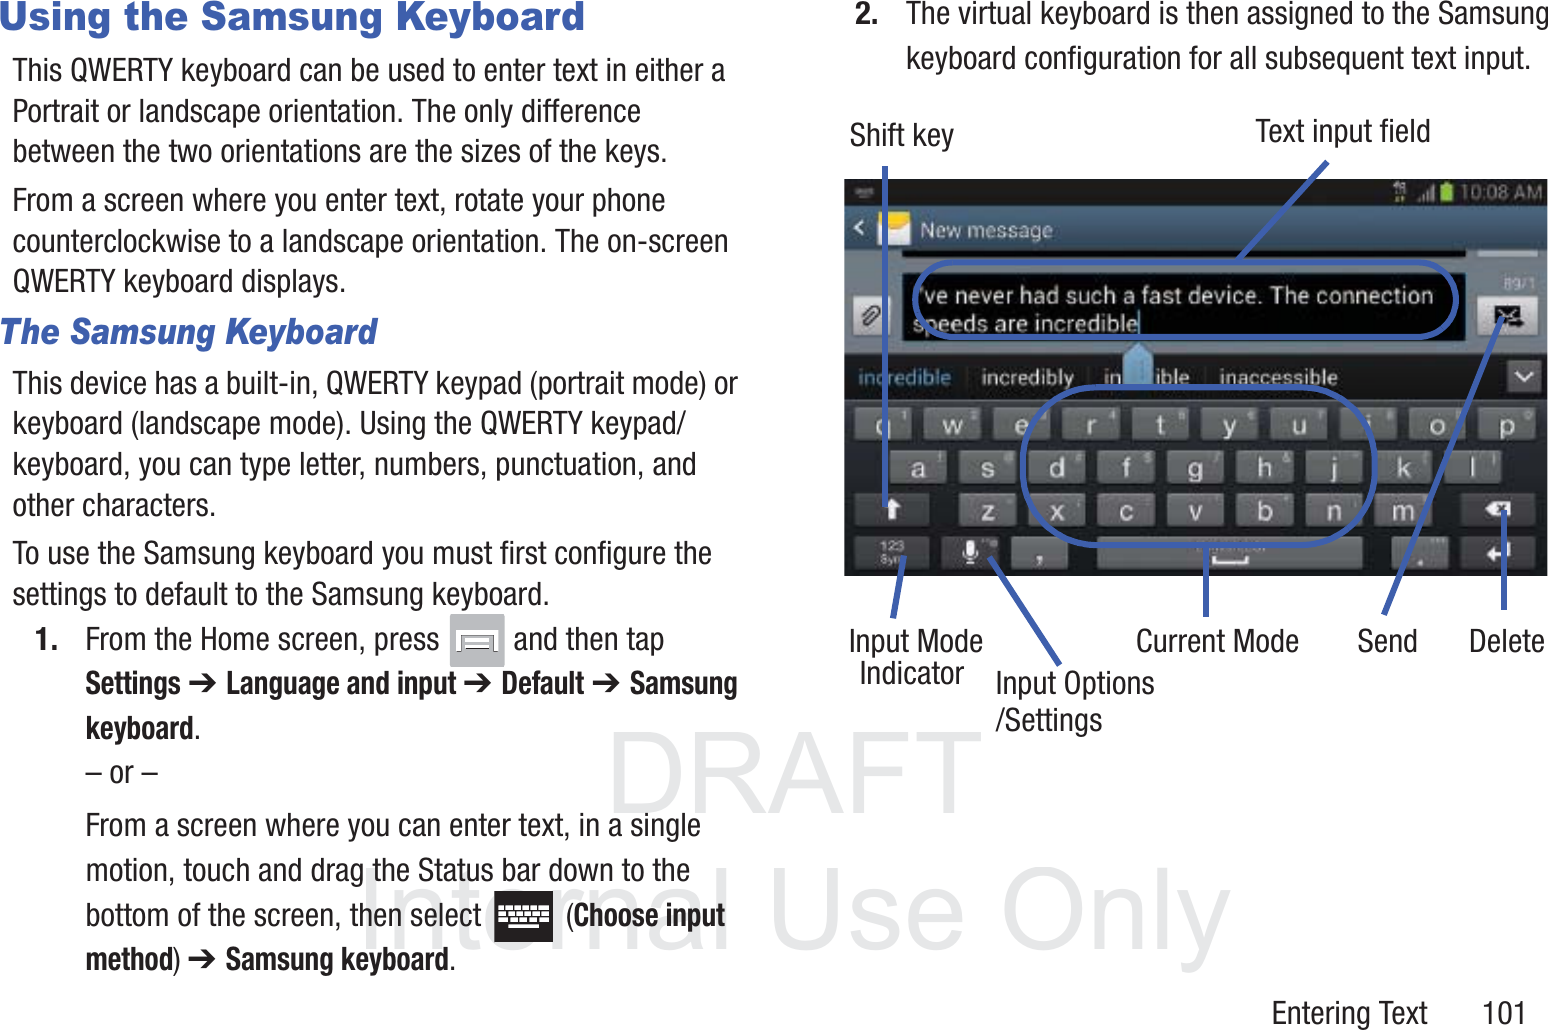 DRAFT InternalUse OnlyEntering Text       101Using the Samsung KeyboardThis QWERTY keyboard can be used to enter text in either a Portrait or landscape orientation. The only difference between the two orientations are the sizes of the keys. From a screen where you enter text, rotate your phone counterclockwise to a landscape orientation. The on-screen QWERTY keyboard displays.The Samsung KeyboardThis device has a built-in, QWERTY keypad (portrait mode) or keyboard (landscape mode). Using the QWERTY keypad/ keyboard, you can type letter, numbers, punctuation, and other characters.To use the Samsung keyboard you must first configure the settings to default to the Samsung keyboard.1. From the Home screen, press   and then tap Settings ➔ Language and input ➔ Default ➔ Samsung keyboard.– or –From a screen where you can enter text, in a single motion, touch and drag the Status bar down to the bottom of the screen, then select   (Choose input method) ➔ Samsung keyboard.2. The virtual keyboard is then assigned to the Samsung keyboard configuration for all subsequent text input. Text input fieldShift keyInput ModeInput OptionsDeleteCurrent ModeIndicatorSend/Settings